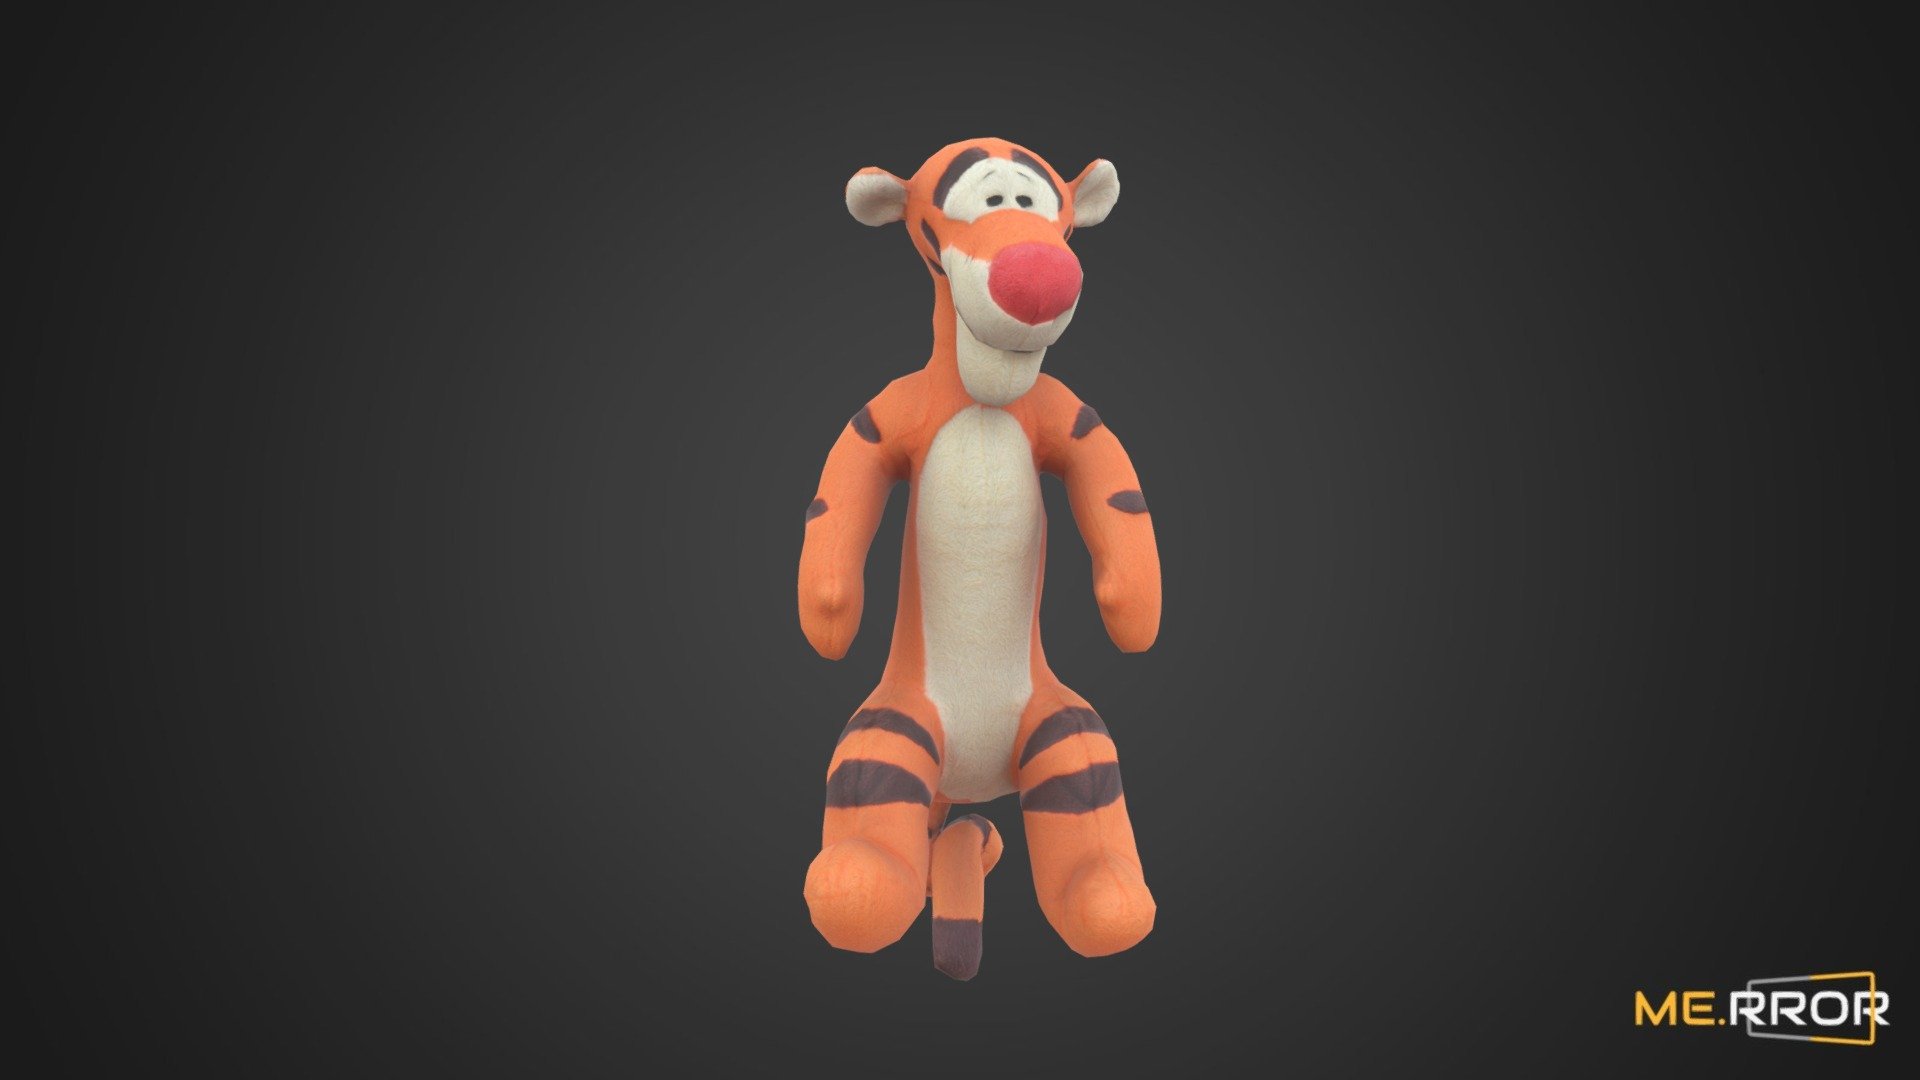 MERROR is a 3D Content PLATFORM which introduces various Asian assets to the 3D world


3DScanning #Photogrametry #ME.RROR - [Game-Ready] Disney Winnie the Pooh Tigger Doll - Buy Royalty Free 3D model by ME.RROR (@merror) 3d model